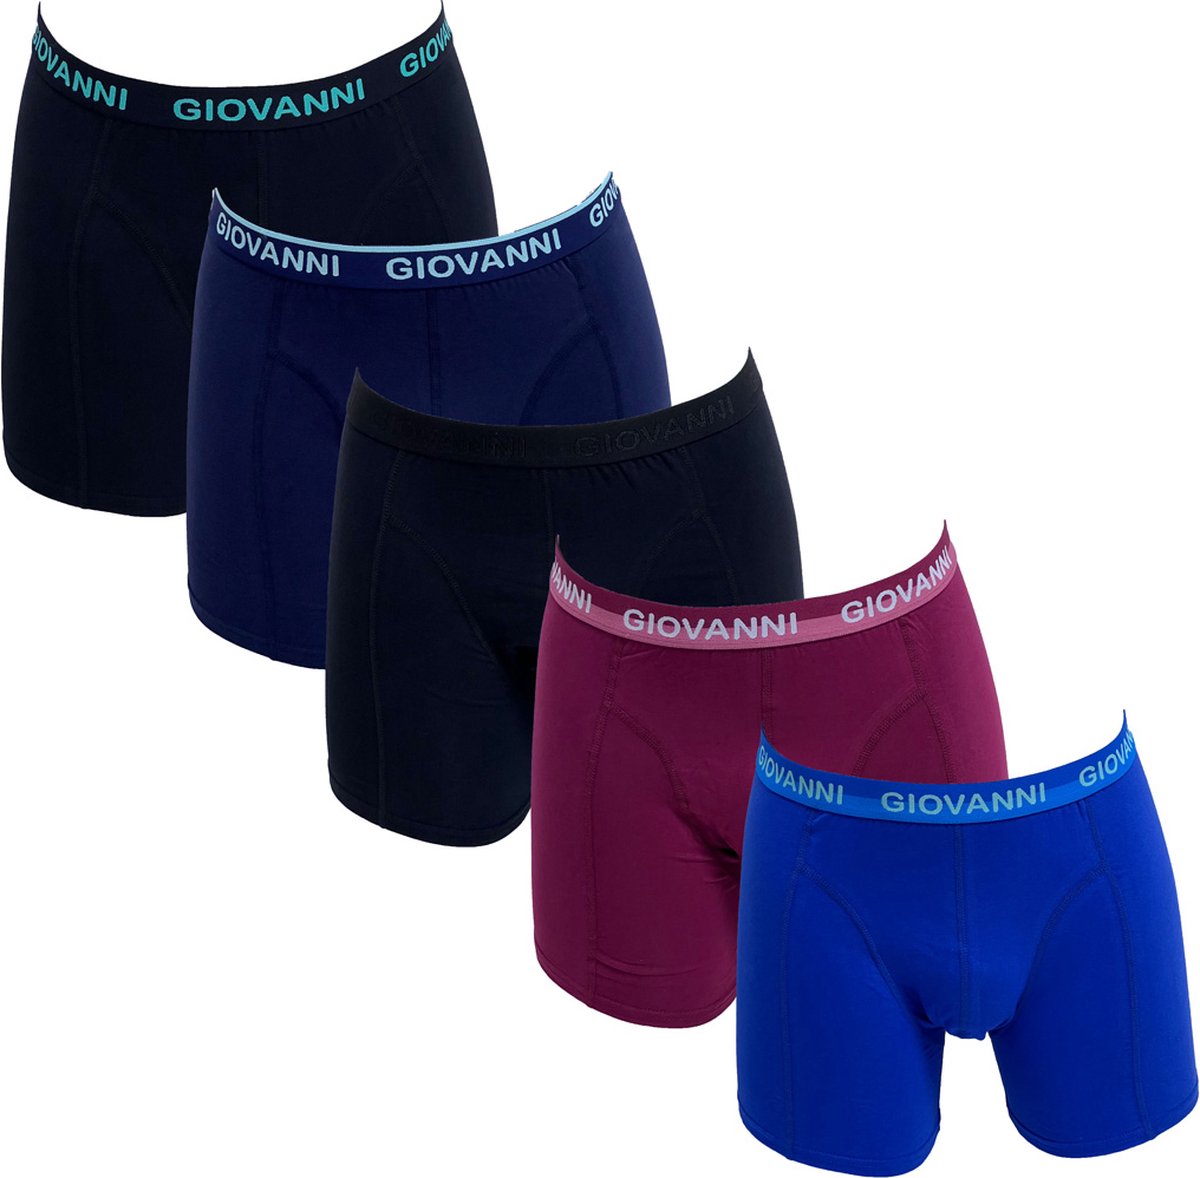 Giovanni Heren Boxershorts 5Pack Mode M34 A Maat XL